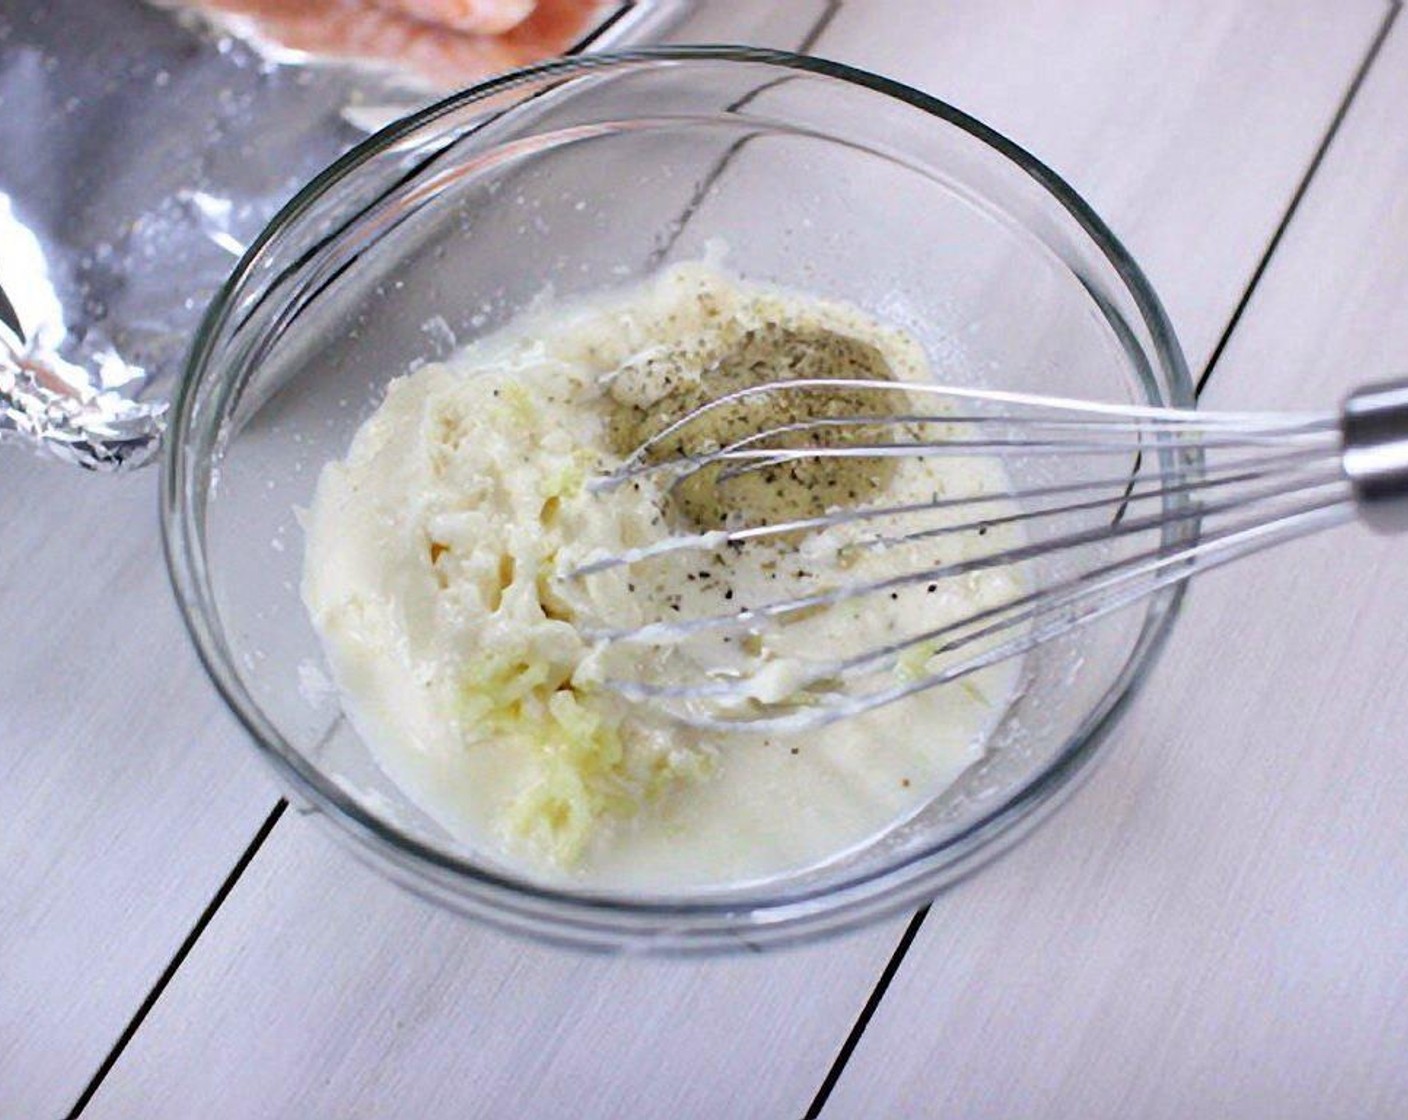 step 4 In a small bowl, combine the Mayonnaise (1/4 cup), juice from Lemon (1), Dijon Mustard (1/2 Tbsp), and Garlic (1 clove). The mixture should be thin enough to easily spread over the onions.